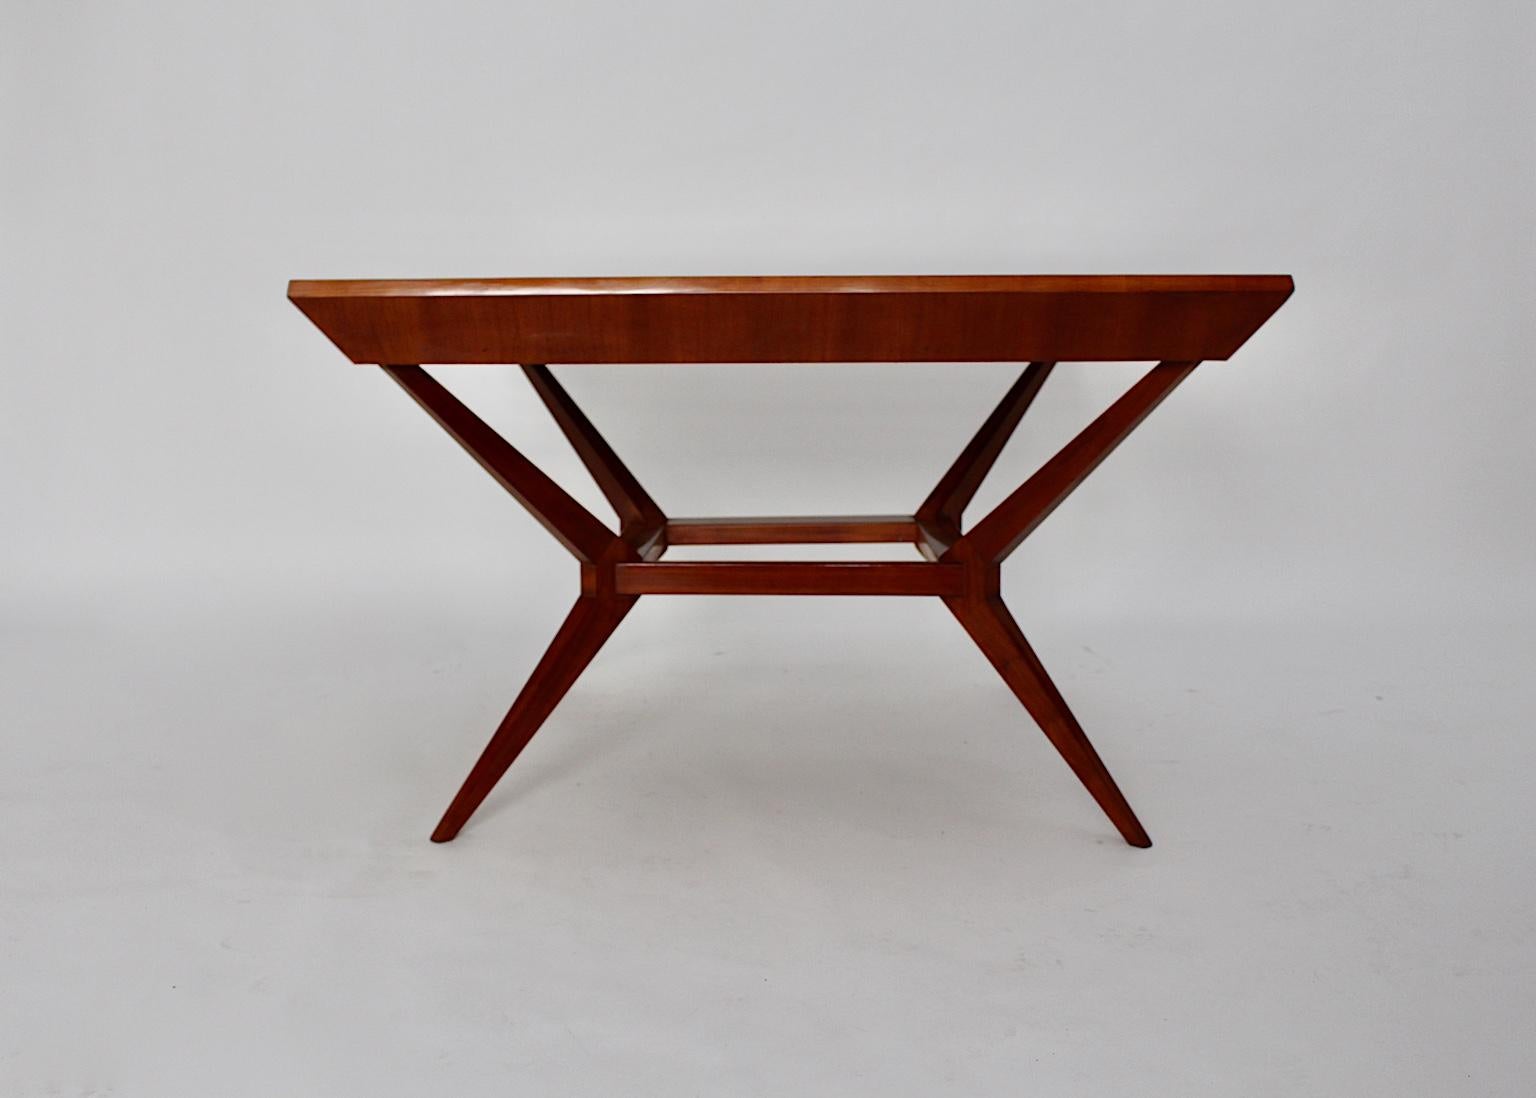 Formica Mid-Century Modern Vintage Cherry Teal Dining Table Franz Schuster Vienna 1950s For Sale